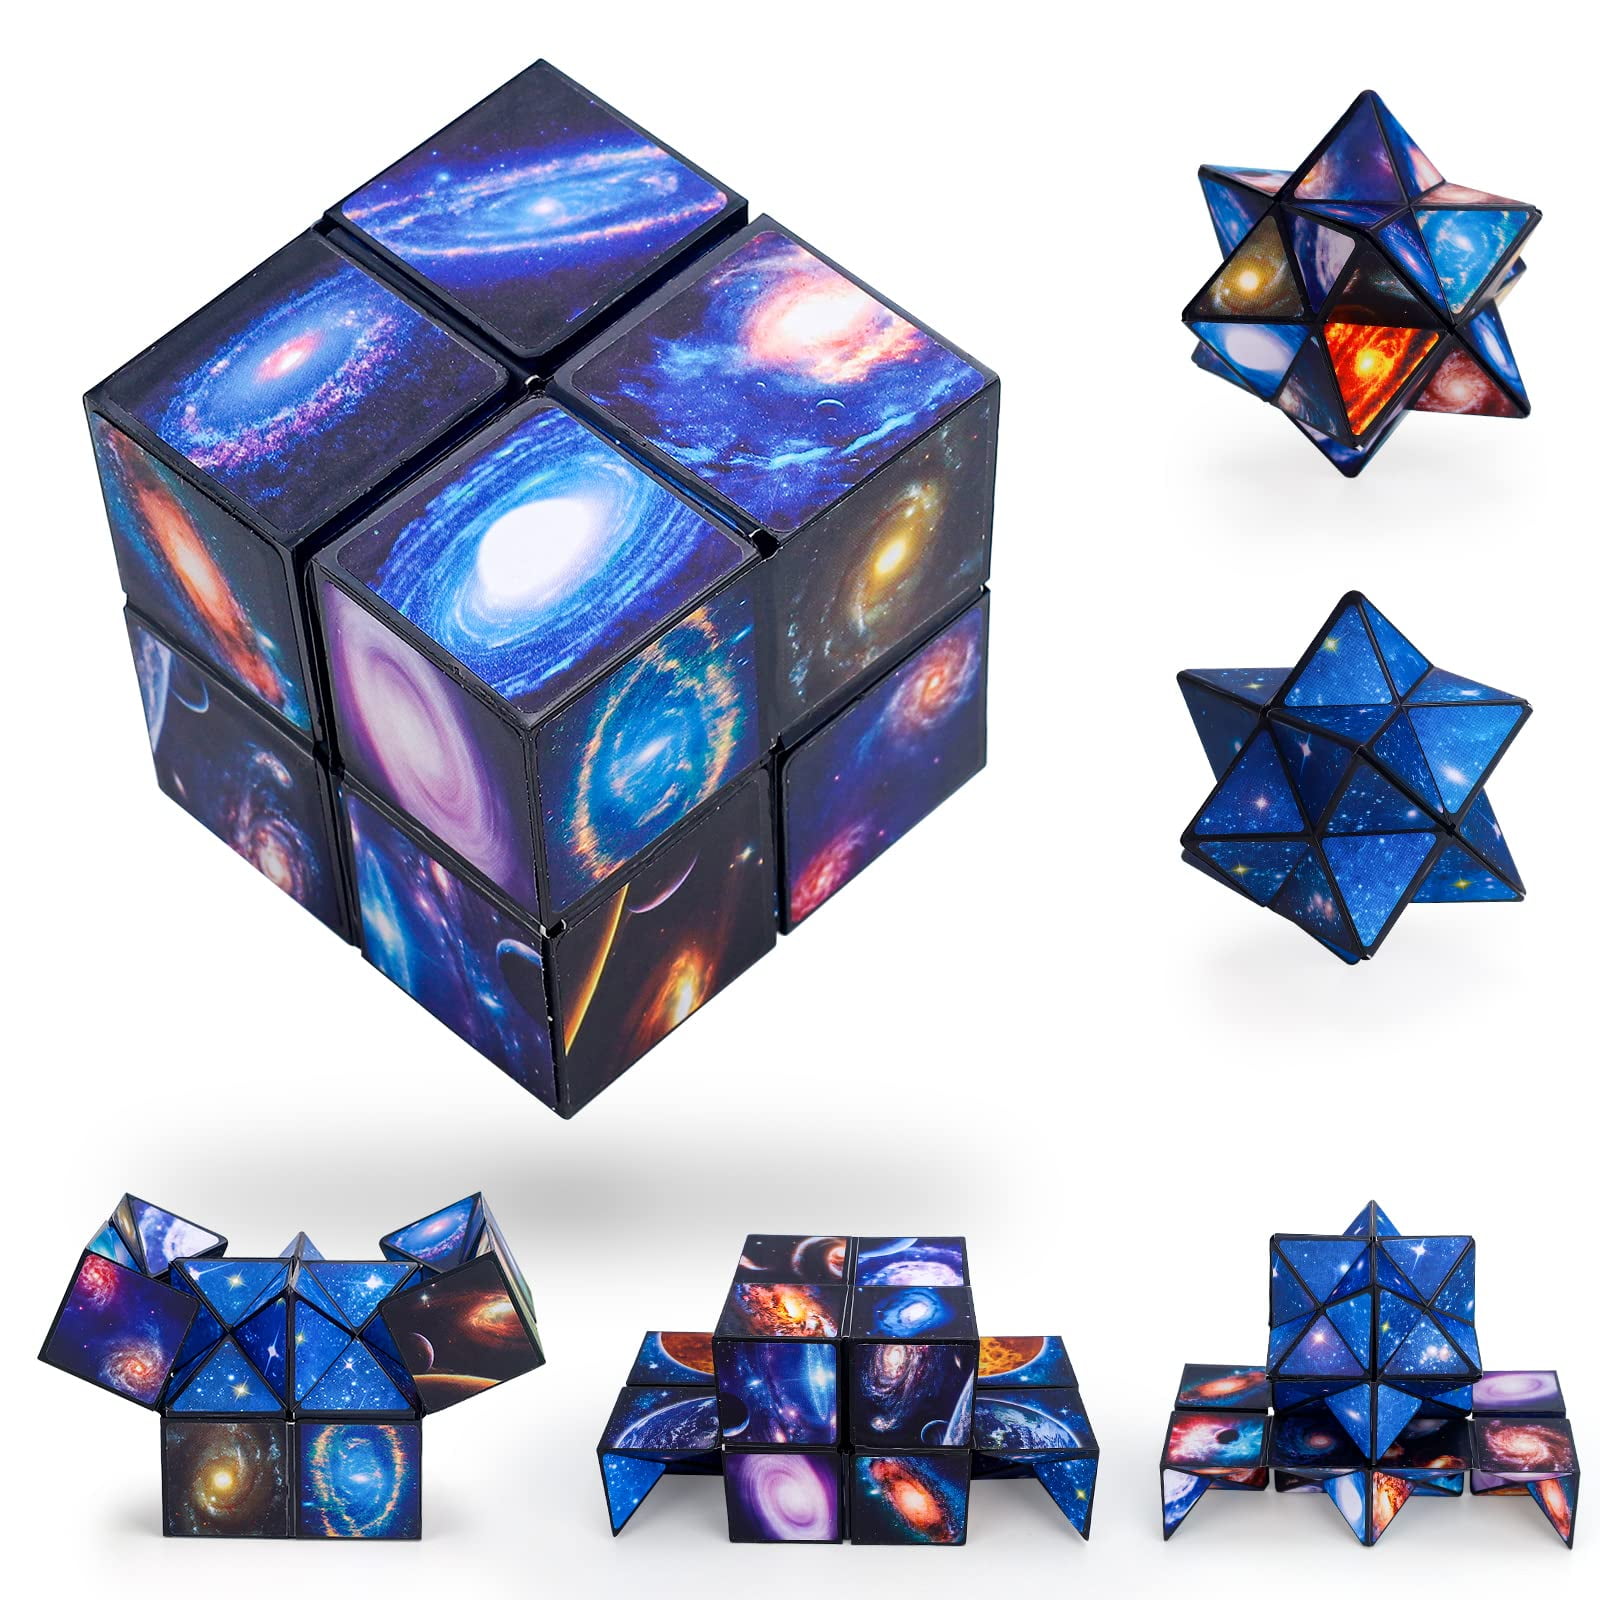 Details about   Magic Infinity Cube Stress Fidget Sensory Toy Autism Anxiety Relief Kids Gifts 